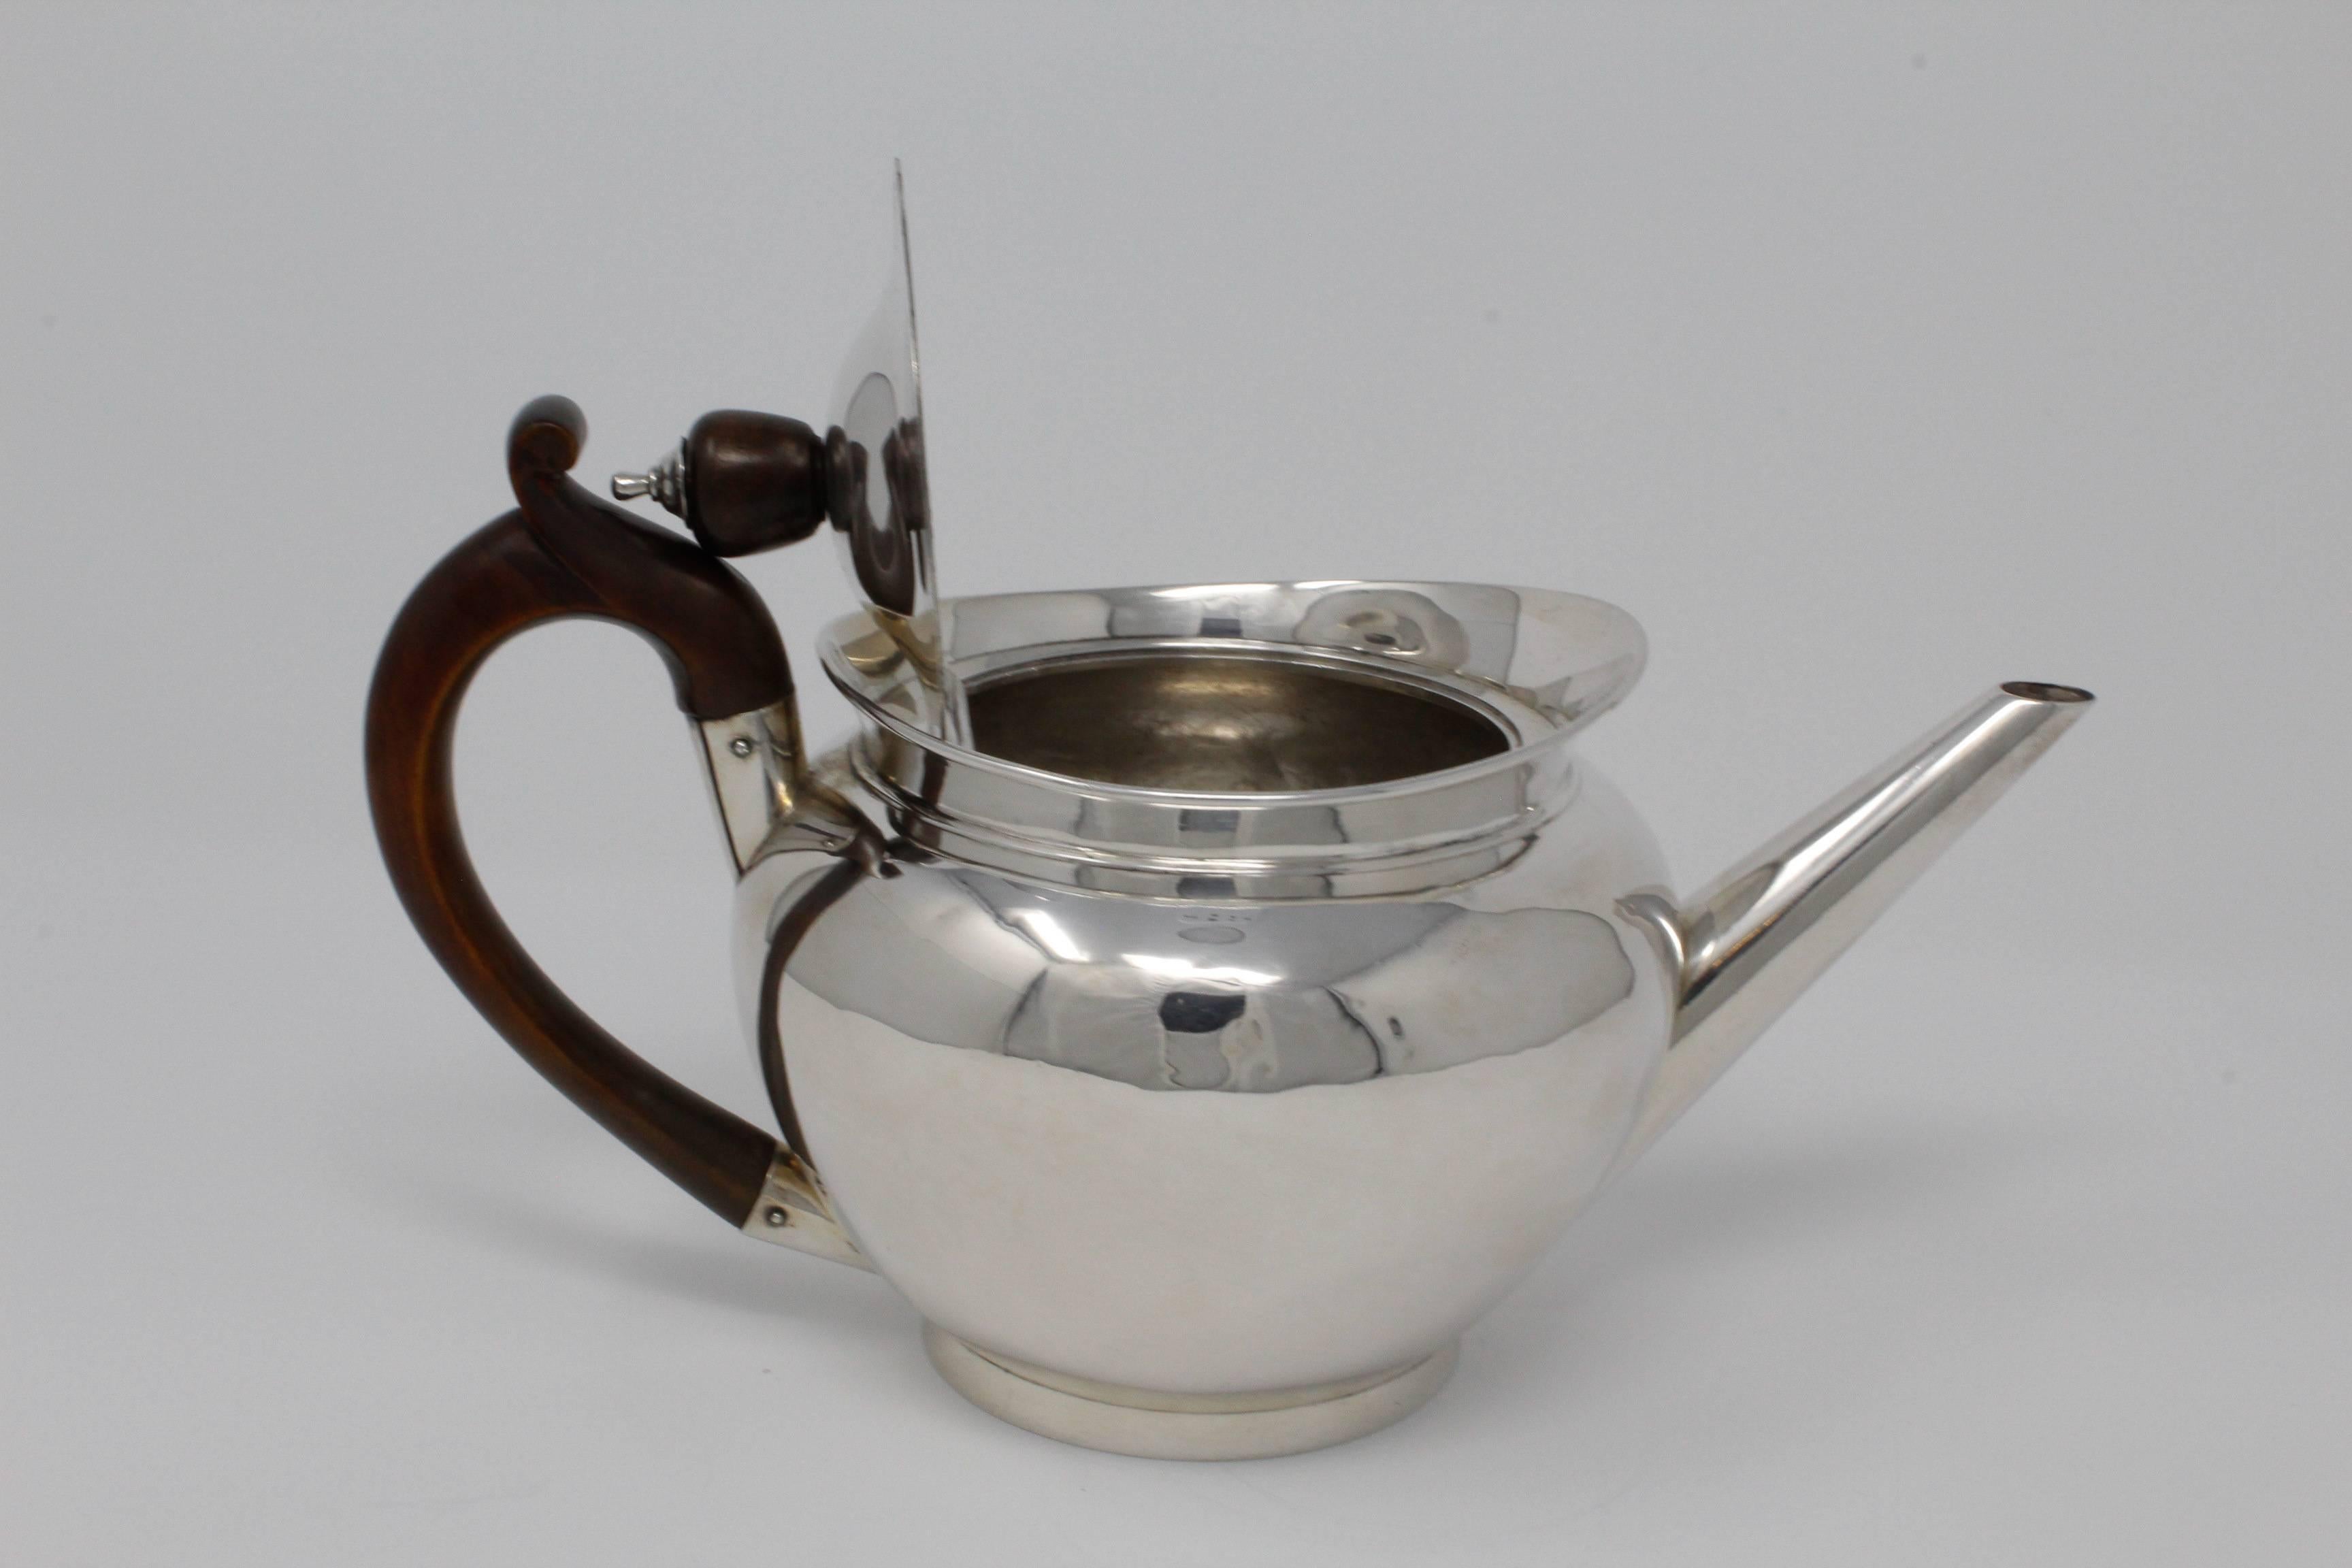 English Sterling Silver Georgian Tea Pot, Robert Garrard I, 1805 In Excellent Condition For Sale In Santa Fe, NM